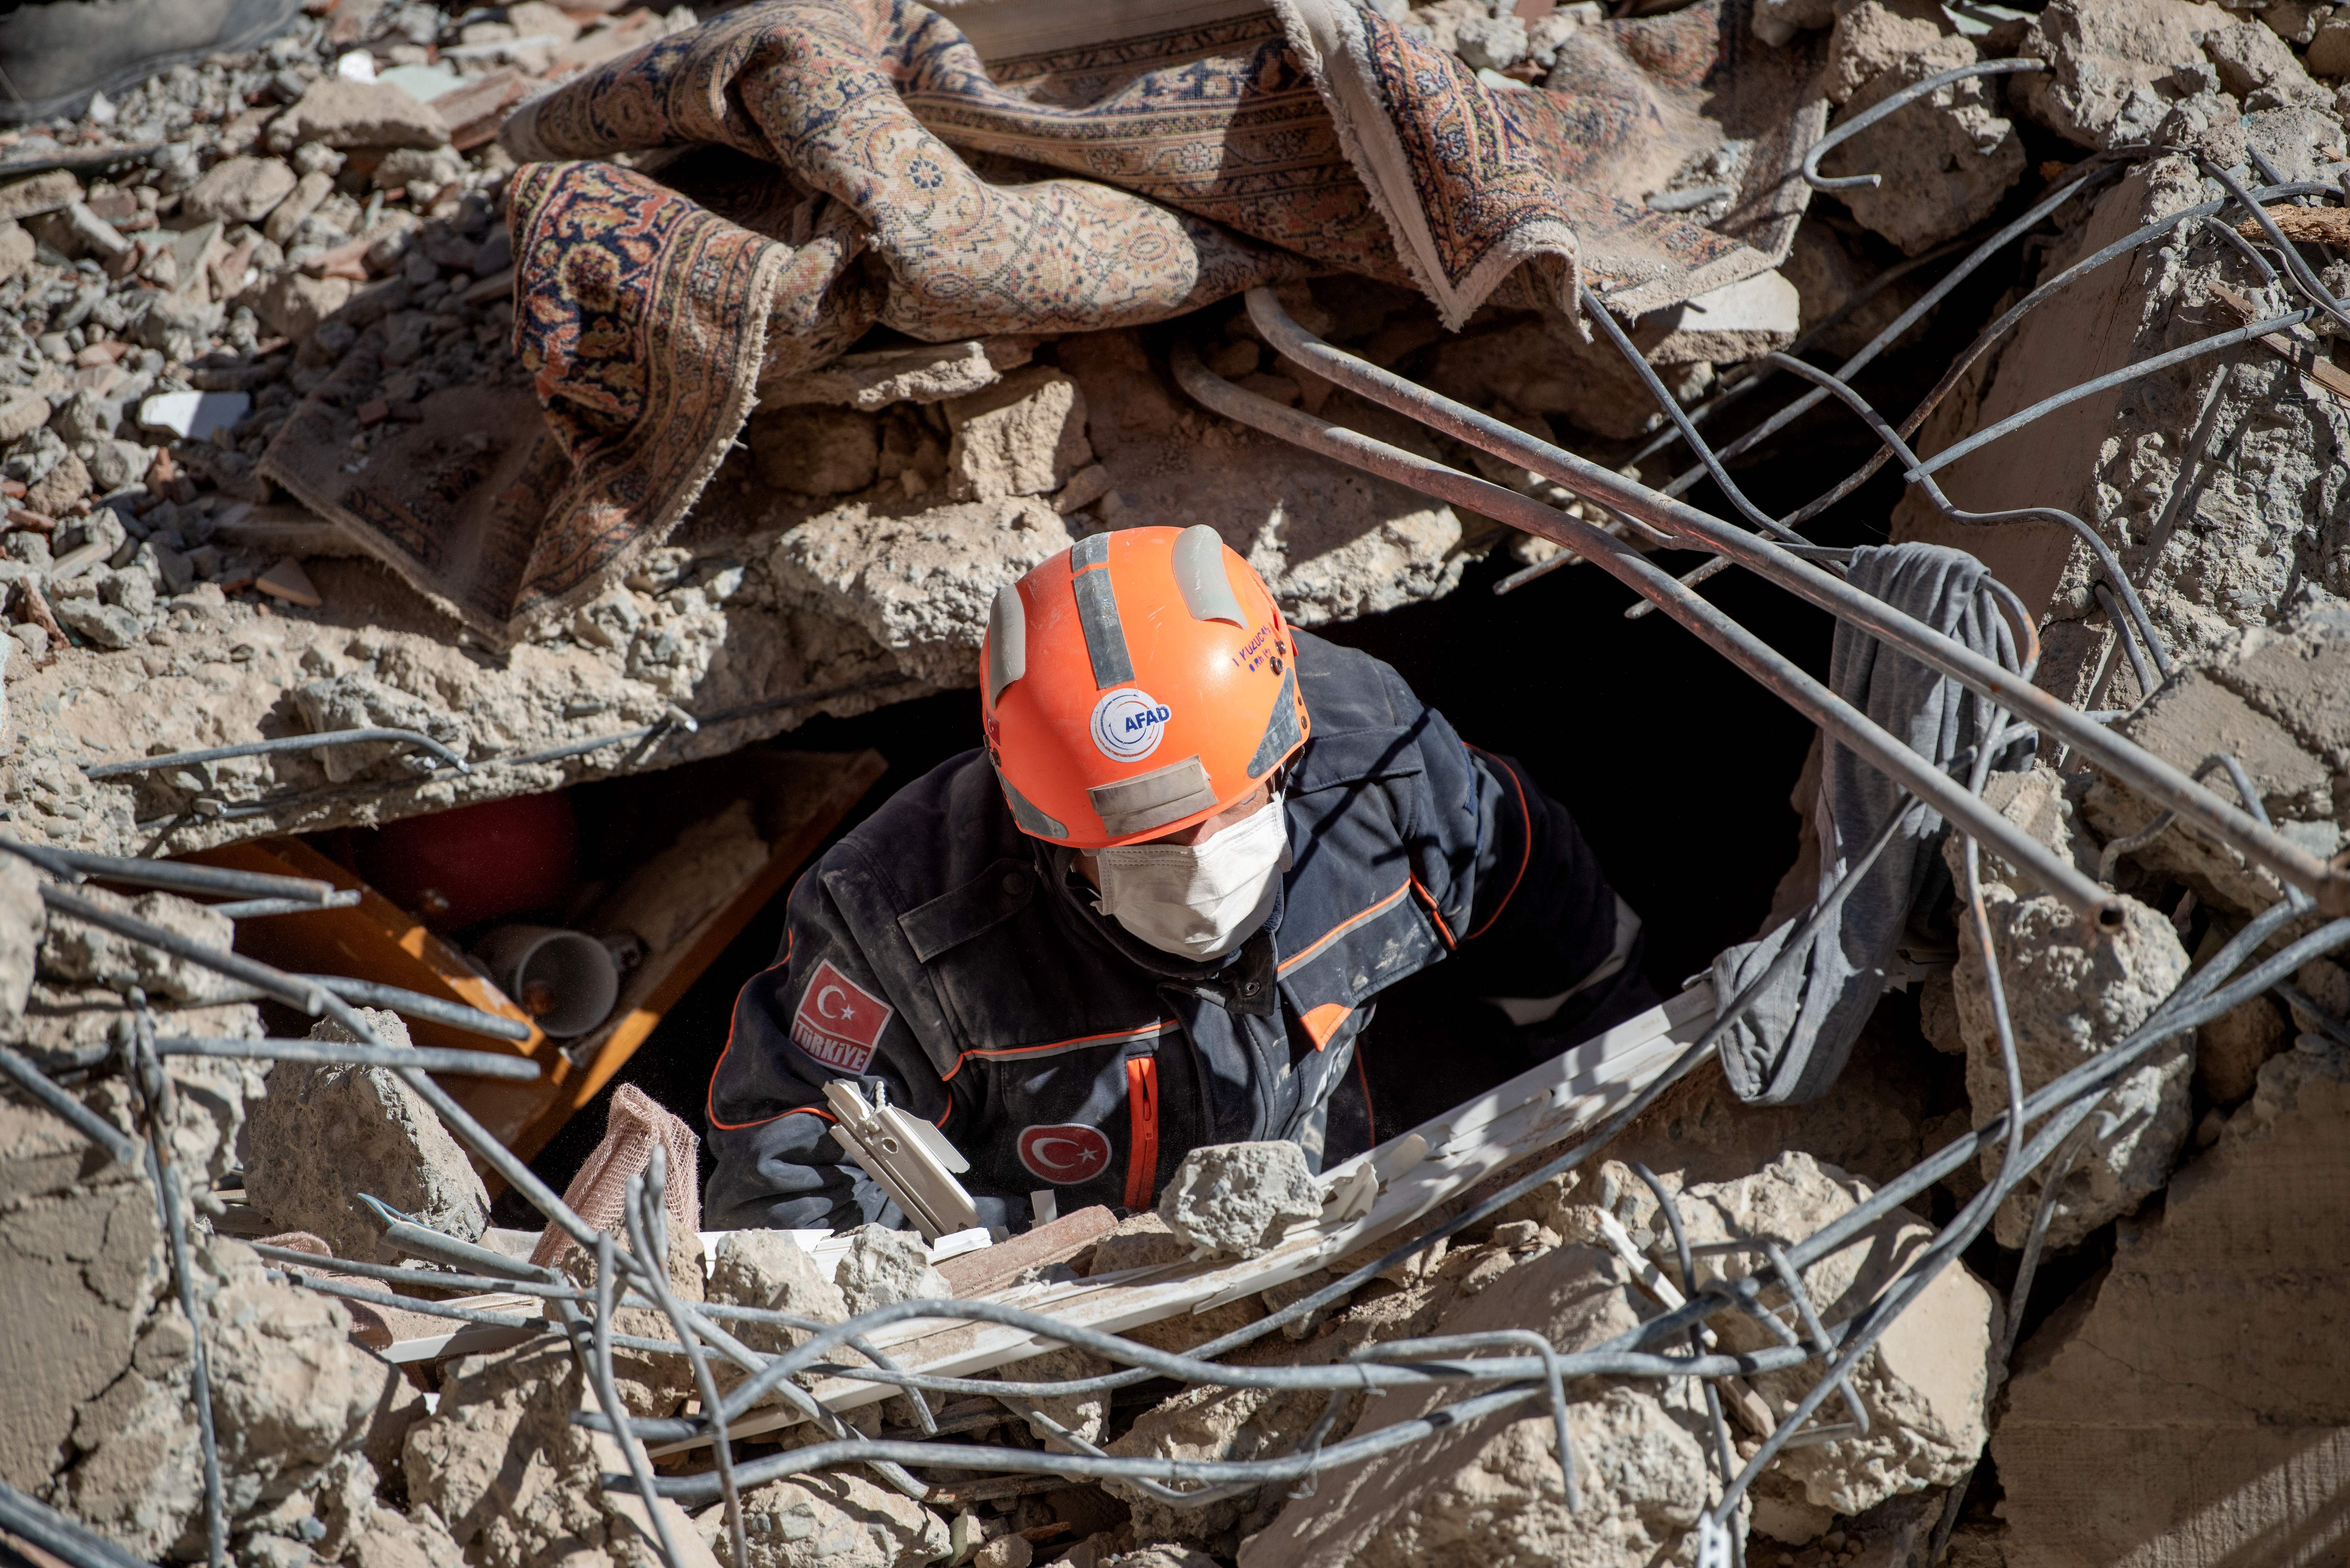 A rescue worker is seen amid the rubble of a building that collapsed due to an earthquake in Elazig